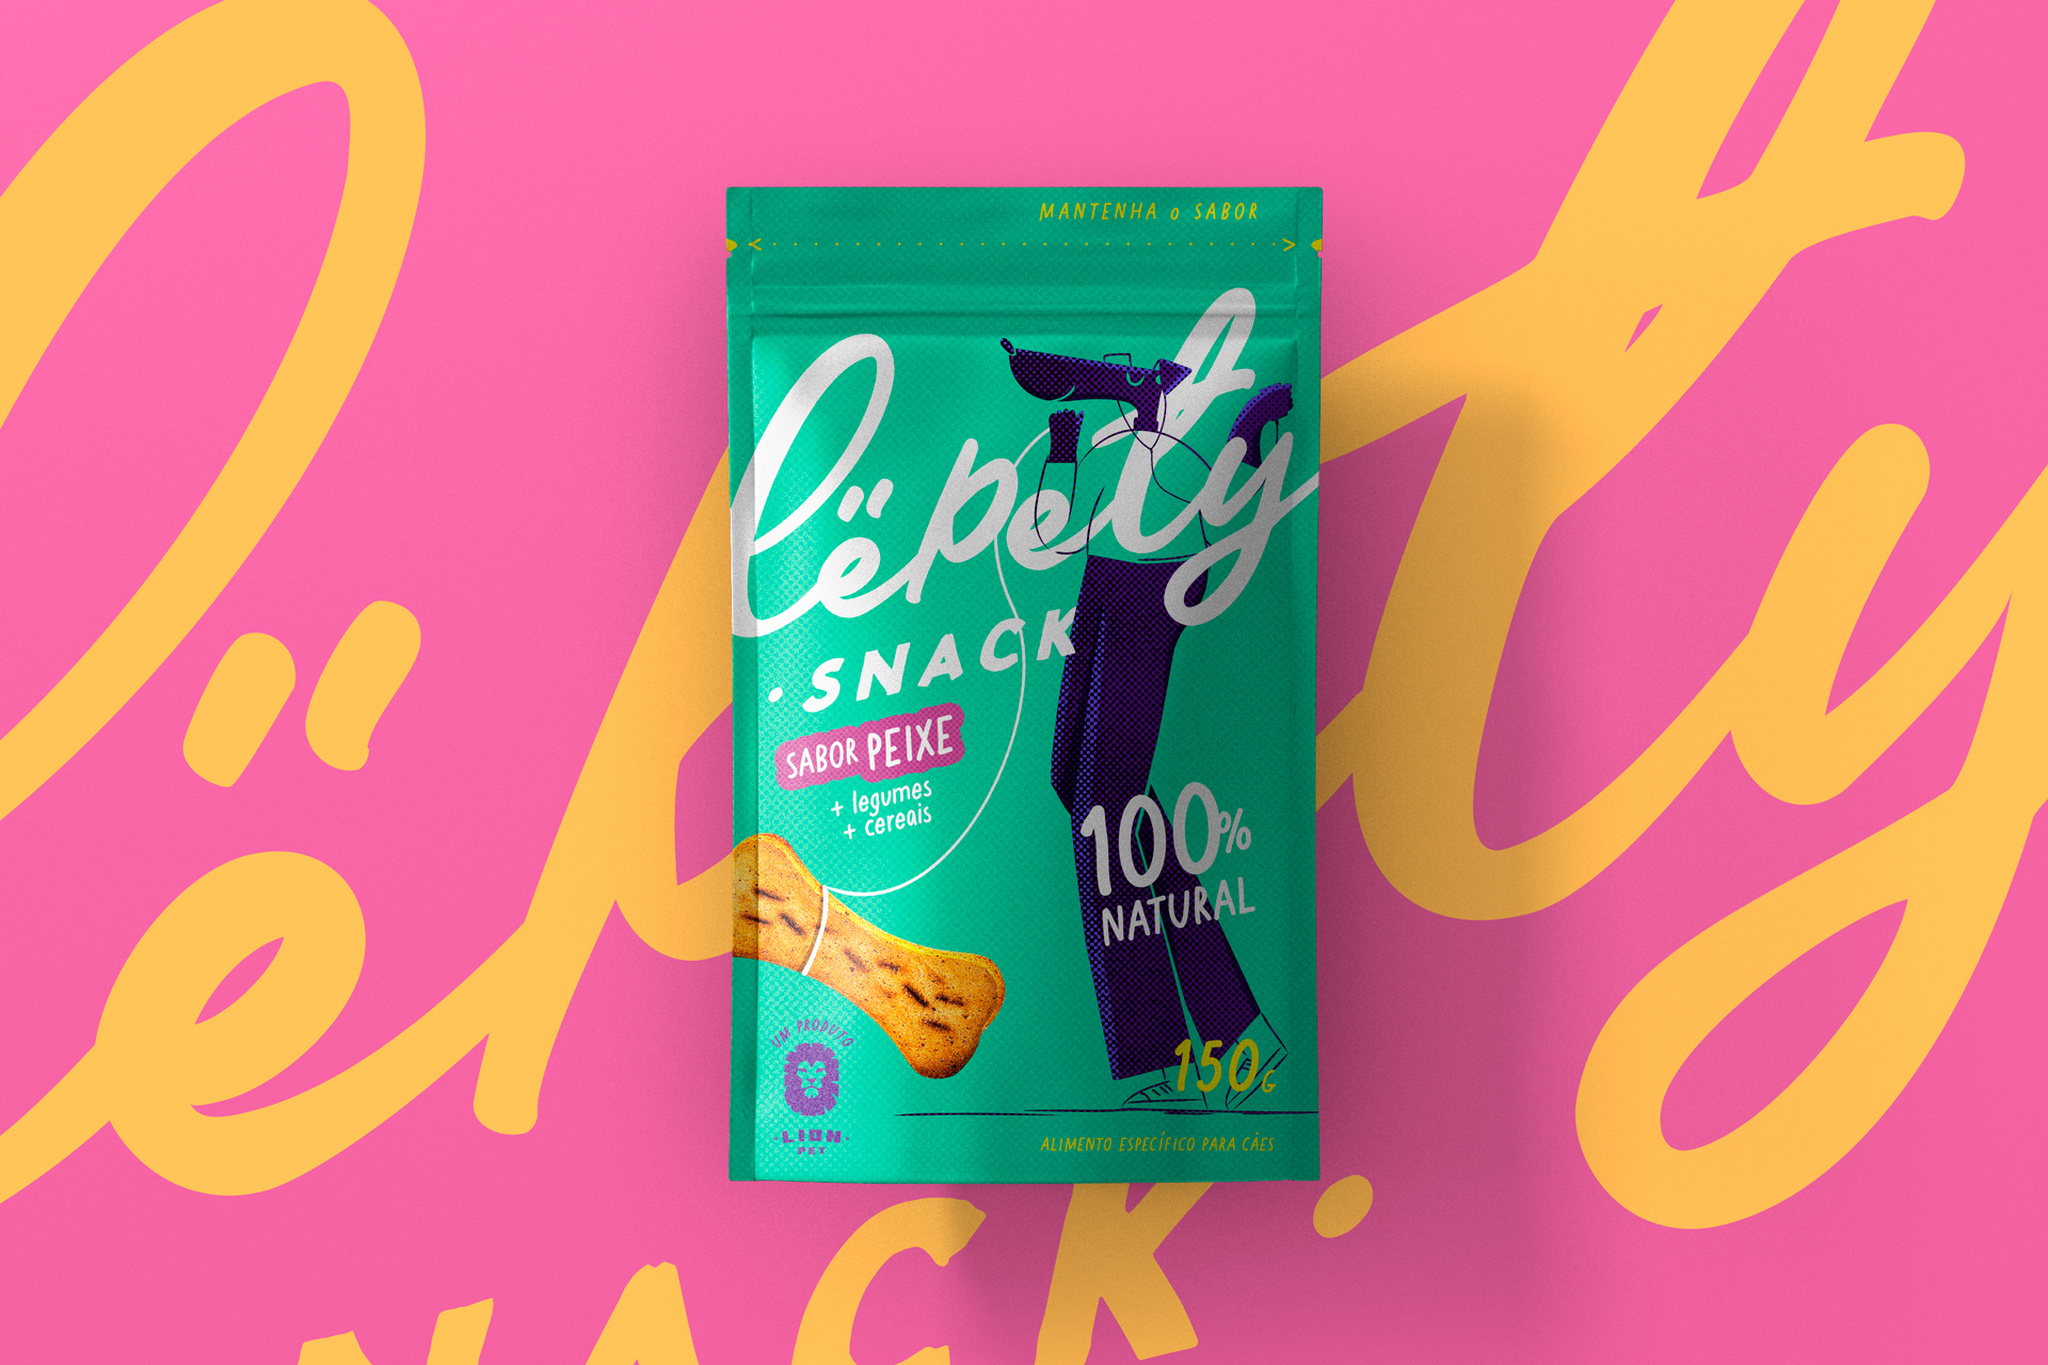 Colored Packaging for Lëpety Snack Dog Food